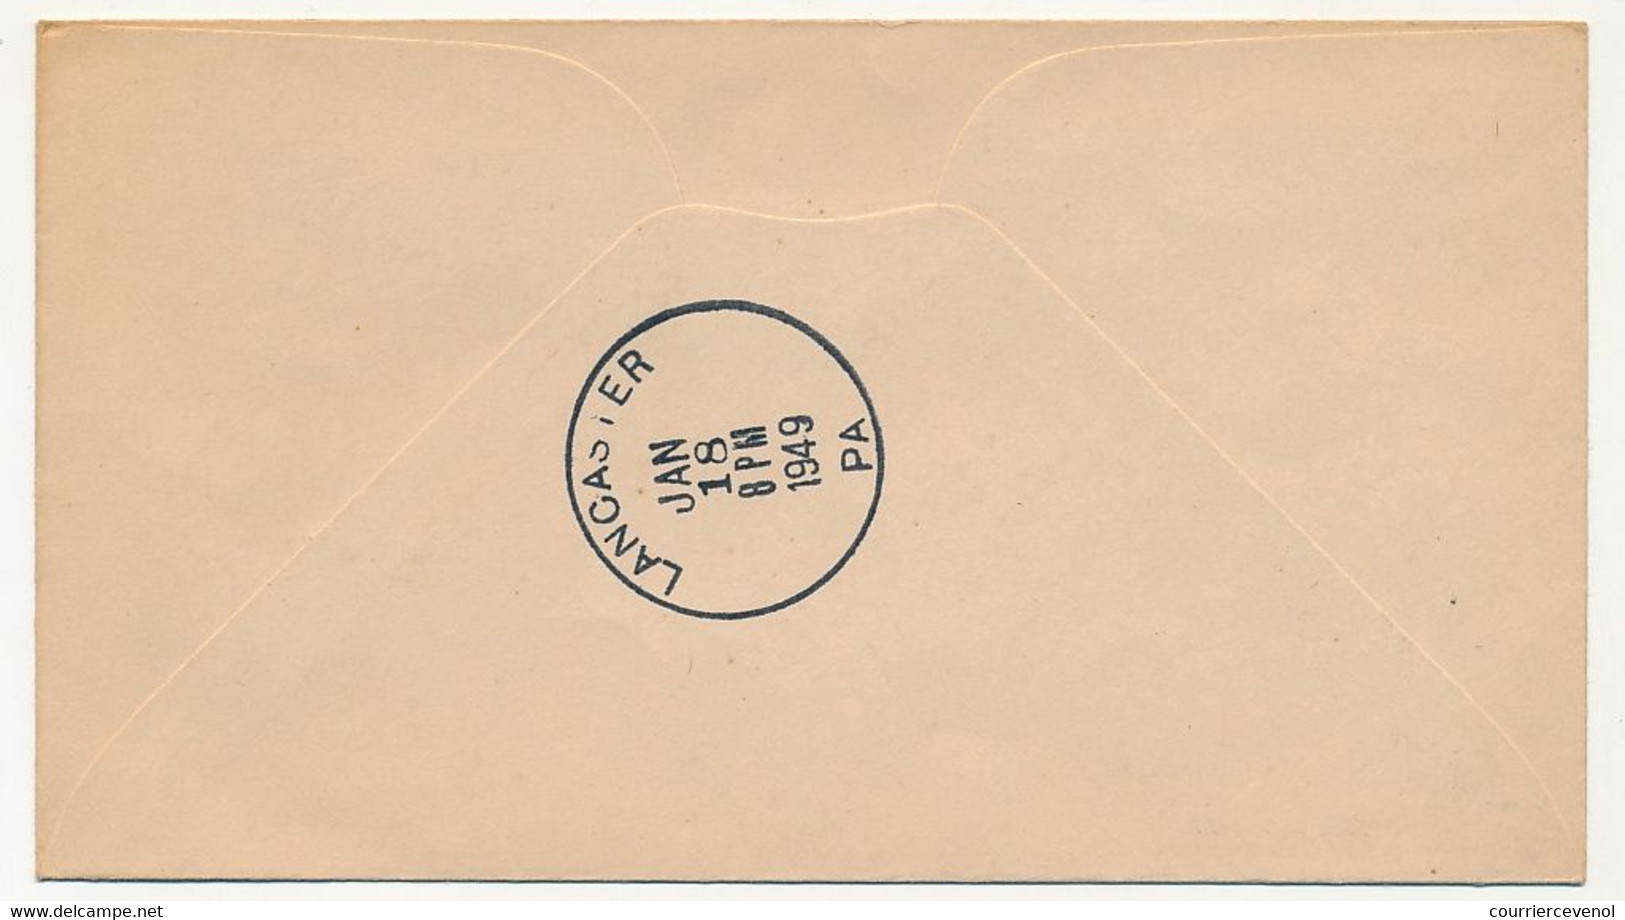 Etats Unis - First Trip Highway Post Office - LANCASTER And HARRISBURG, PENNSYLVANIA - 18 Janvier 1949 - Covers & Documents